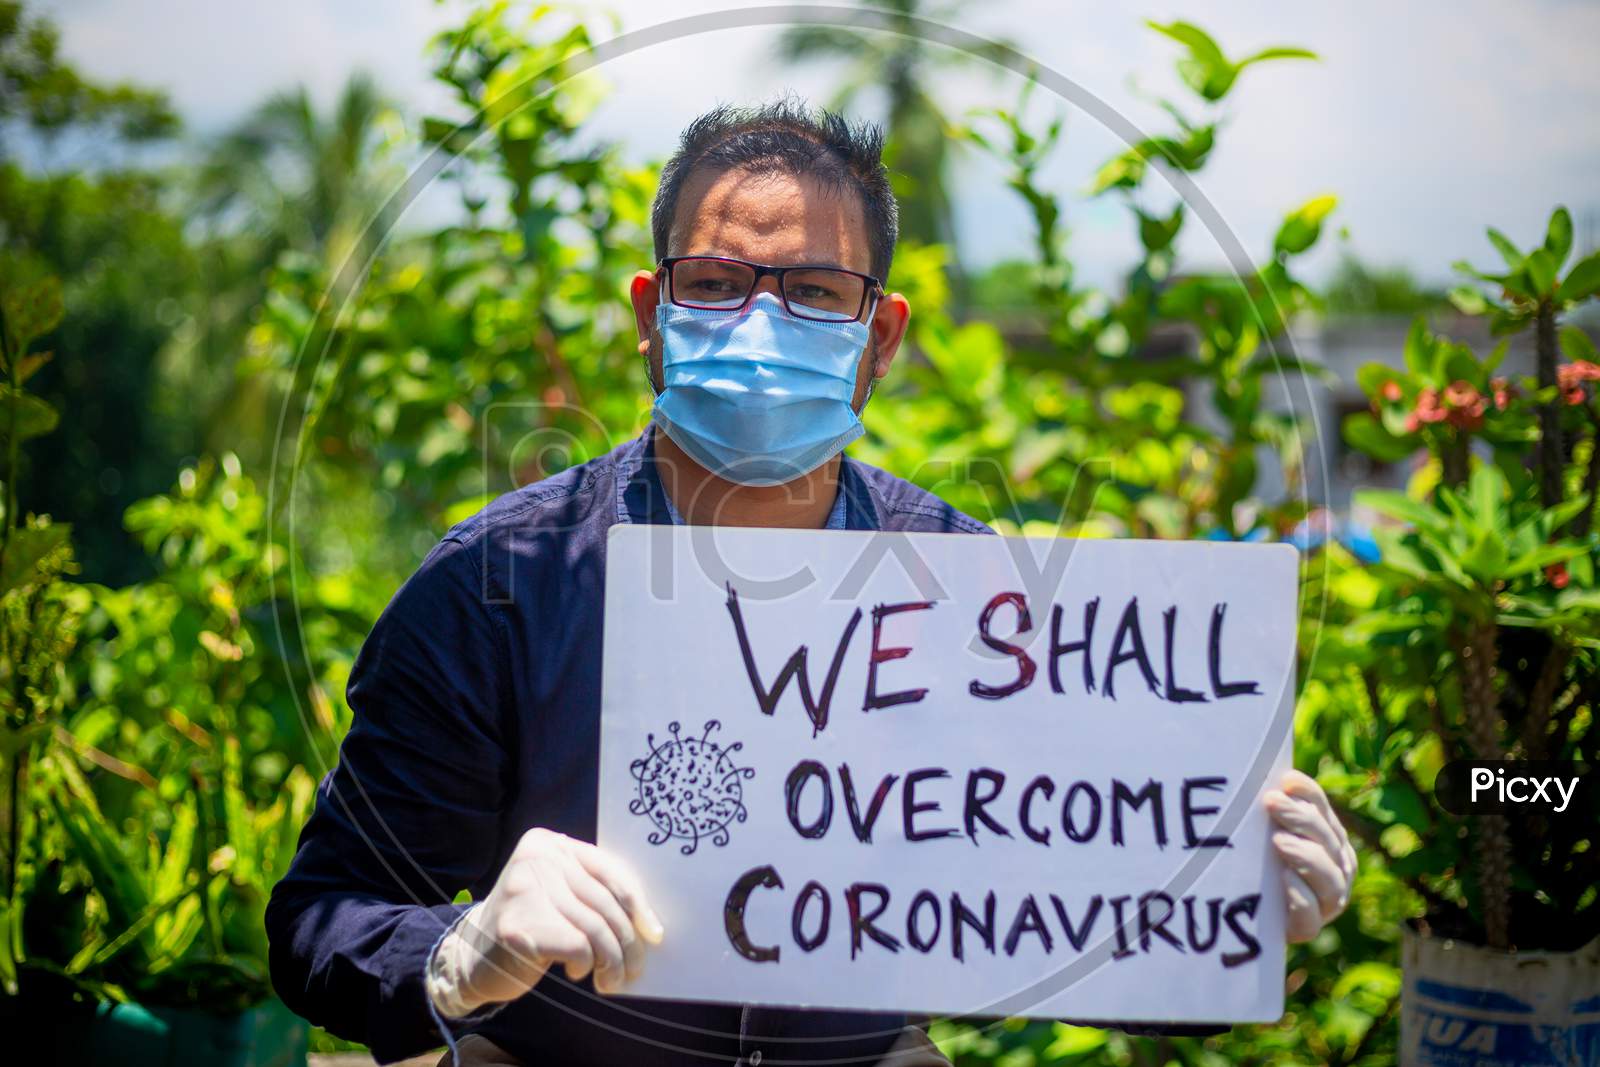 A Young Man Wearing A Medical Mask And Safety Gloves Stands With A Placard Message To "We Shall Overcome Coronavirus".A Man Holding A Placard Message In Outdoor Natural Light.